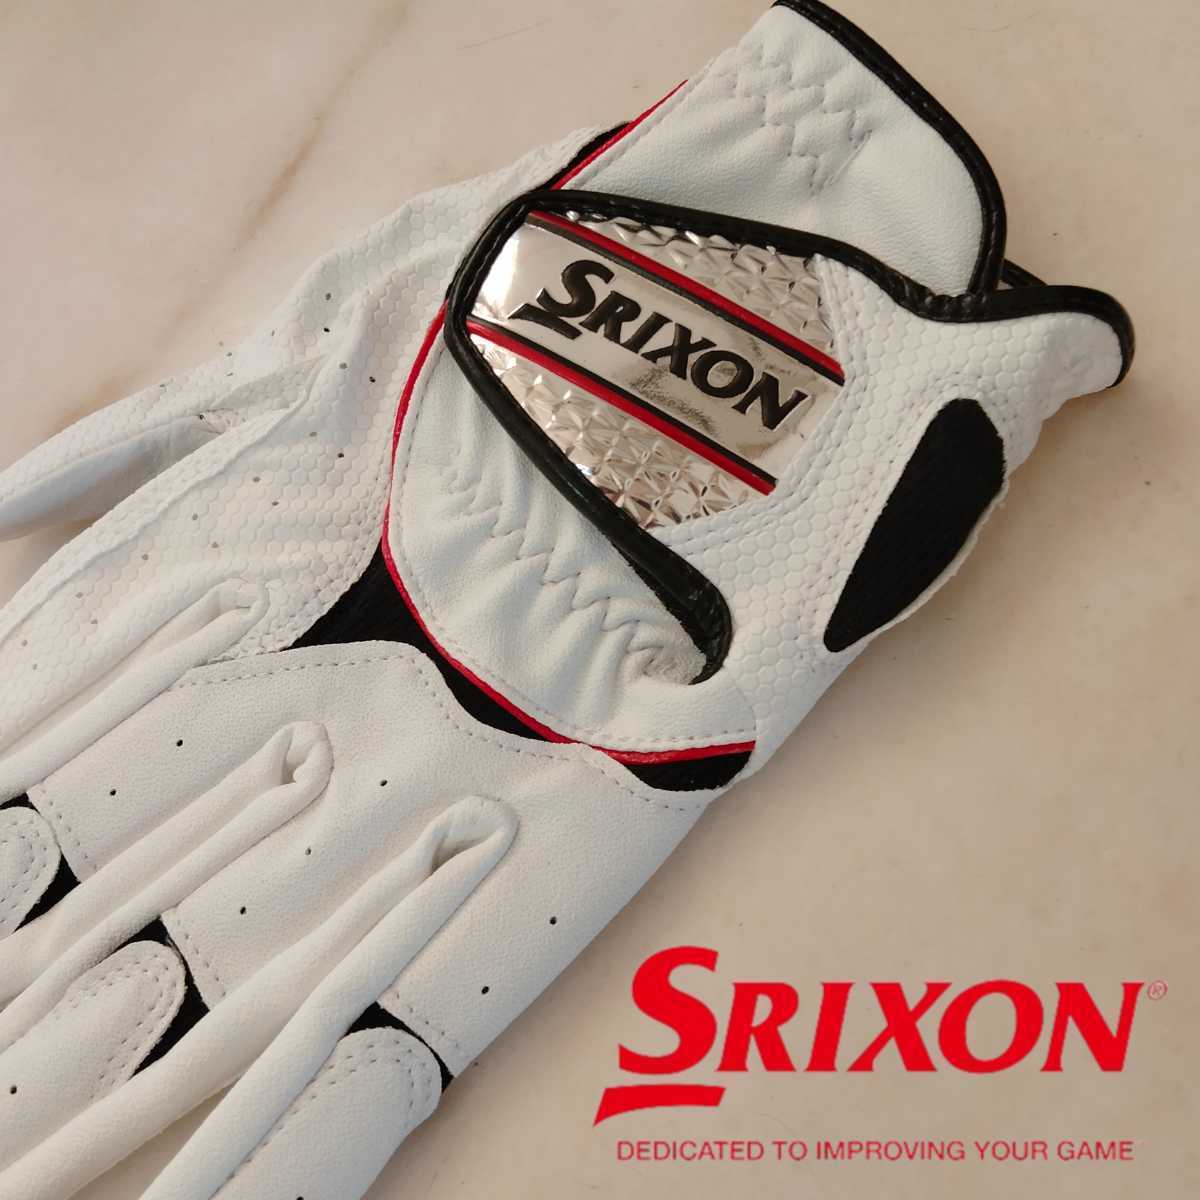  Srixon 25cm white 3 pieces set Dunlop Srixon Golf glove S0003 new goods anonymity delivery free shipping 